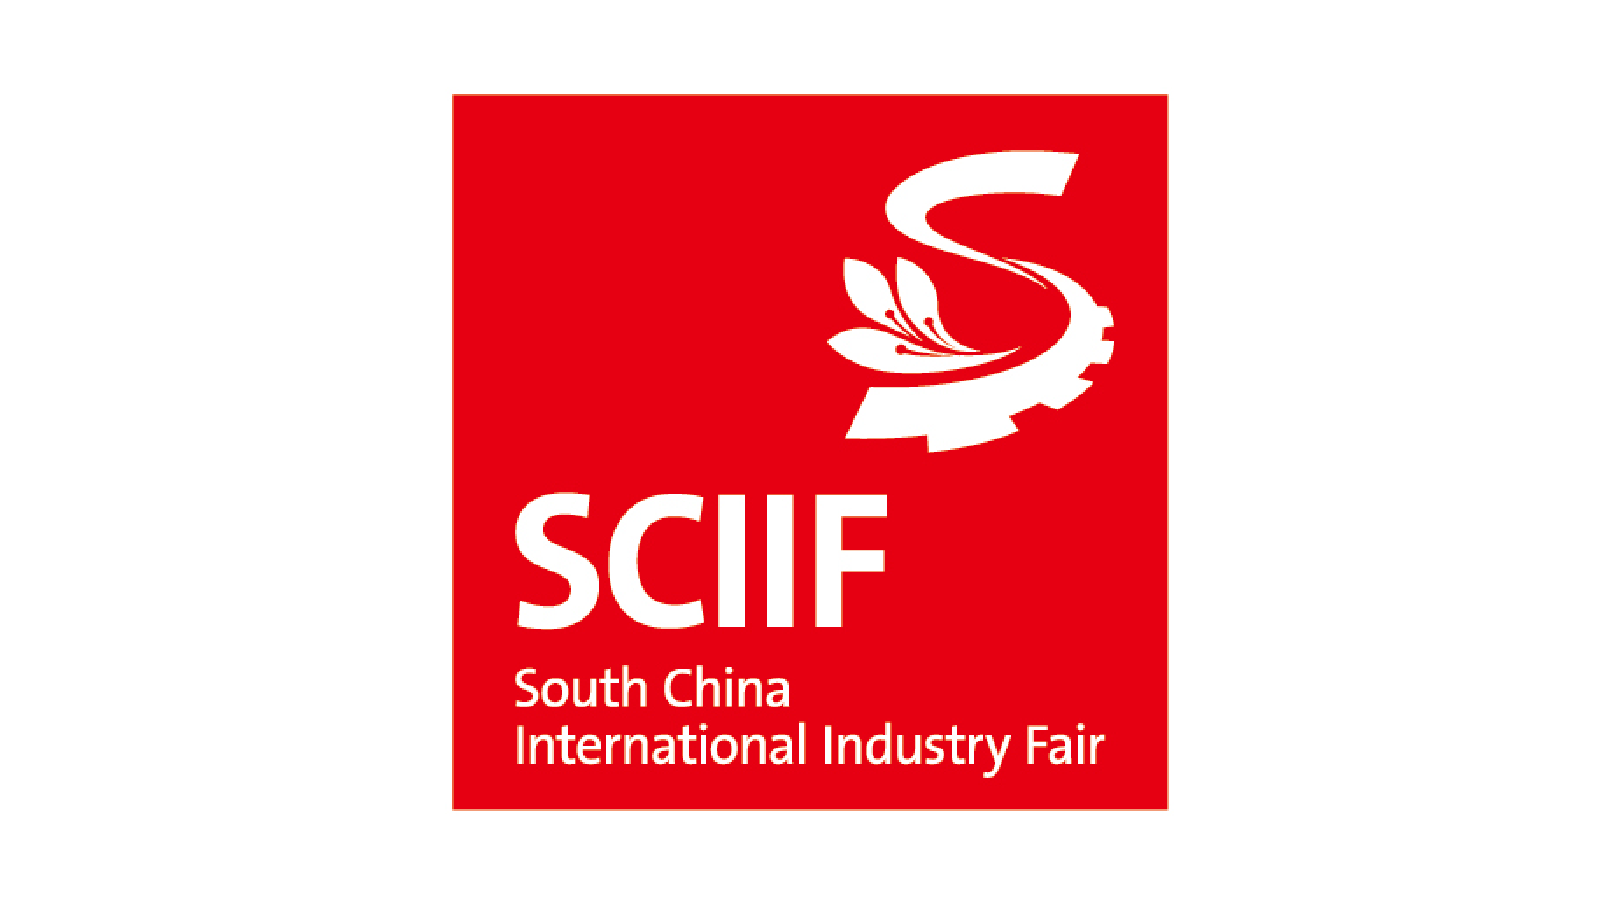 Red and white logo of the South China International Industry Fair (SCIIF)